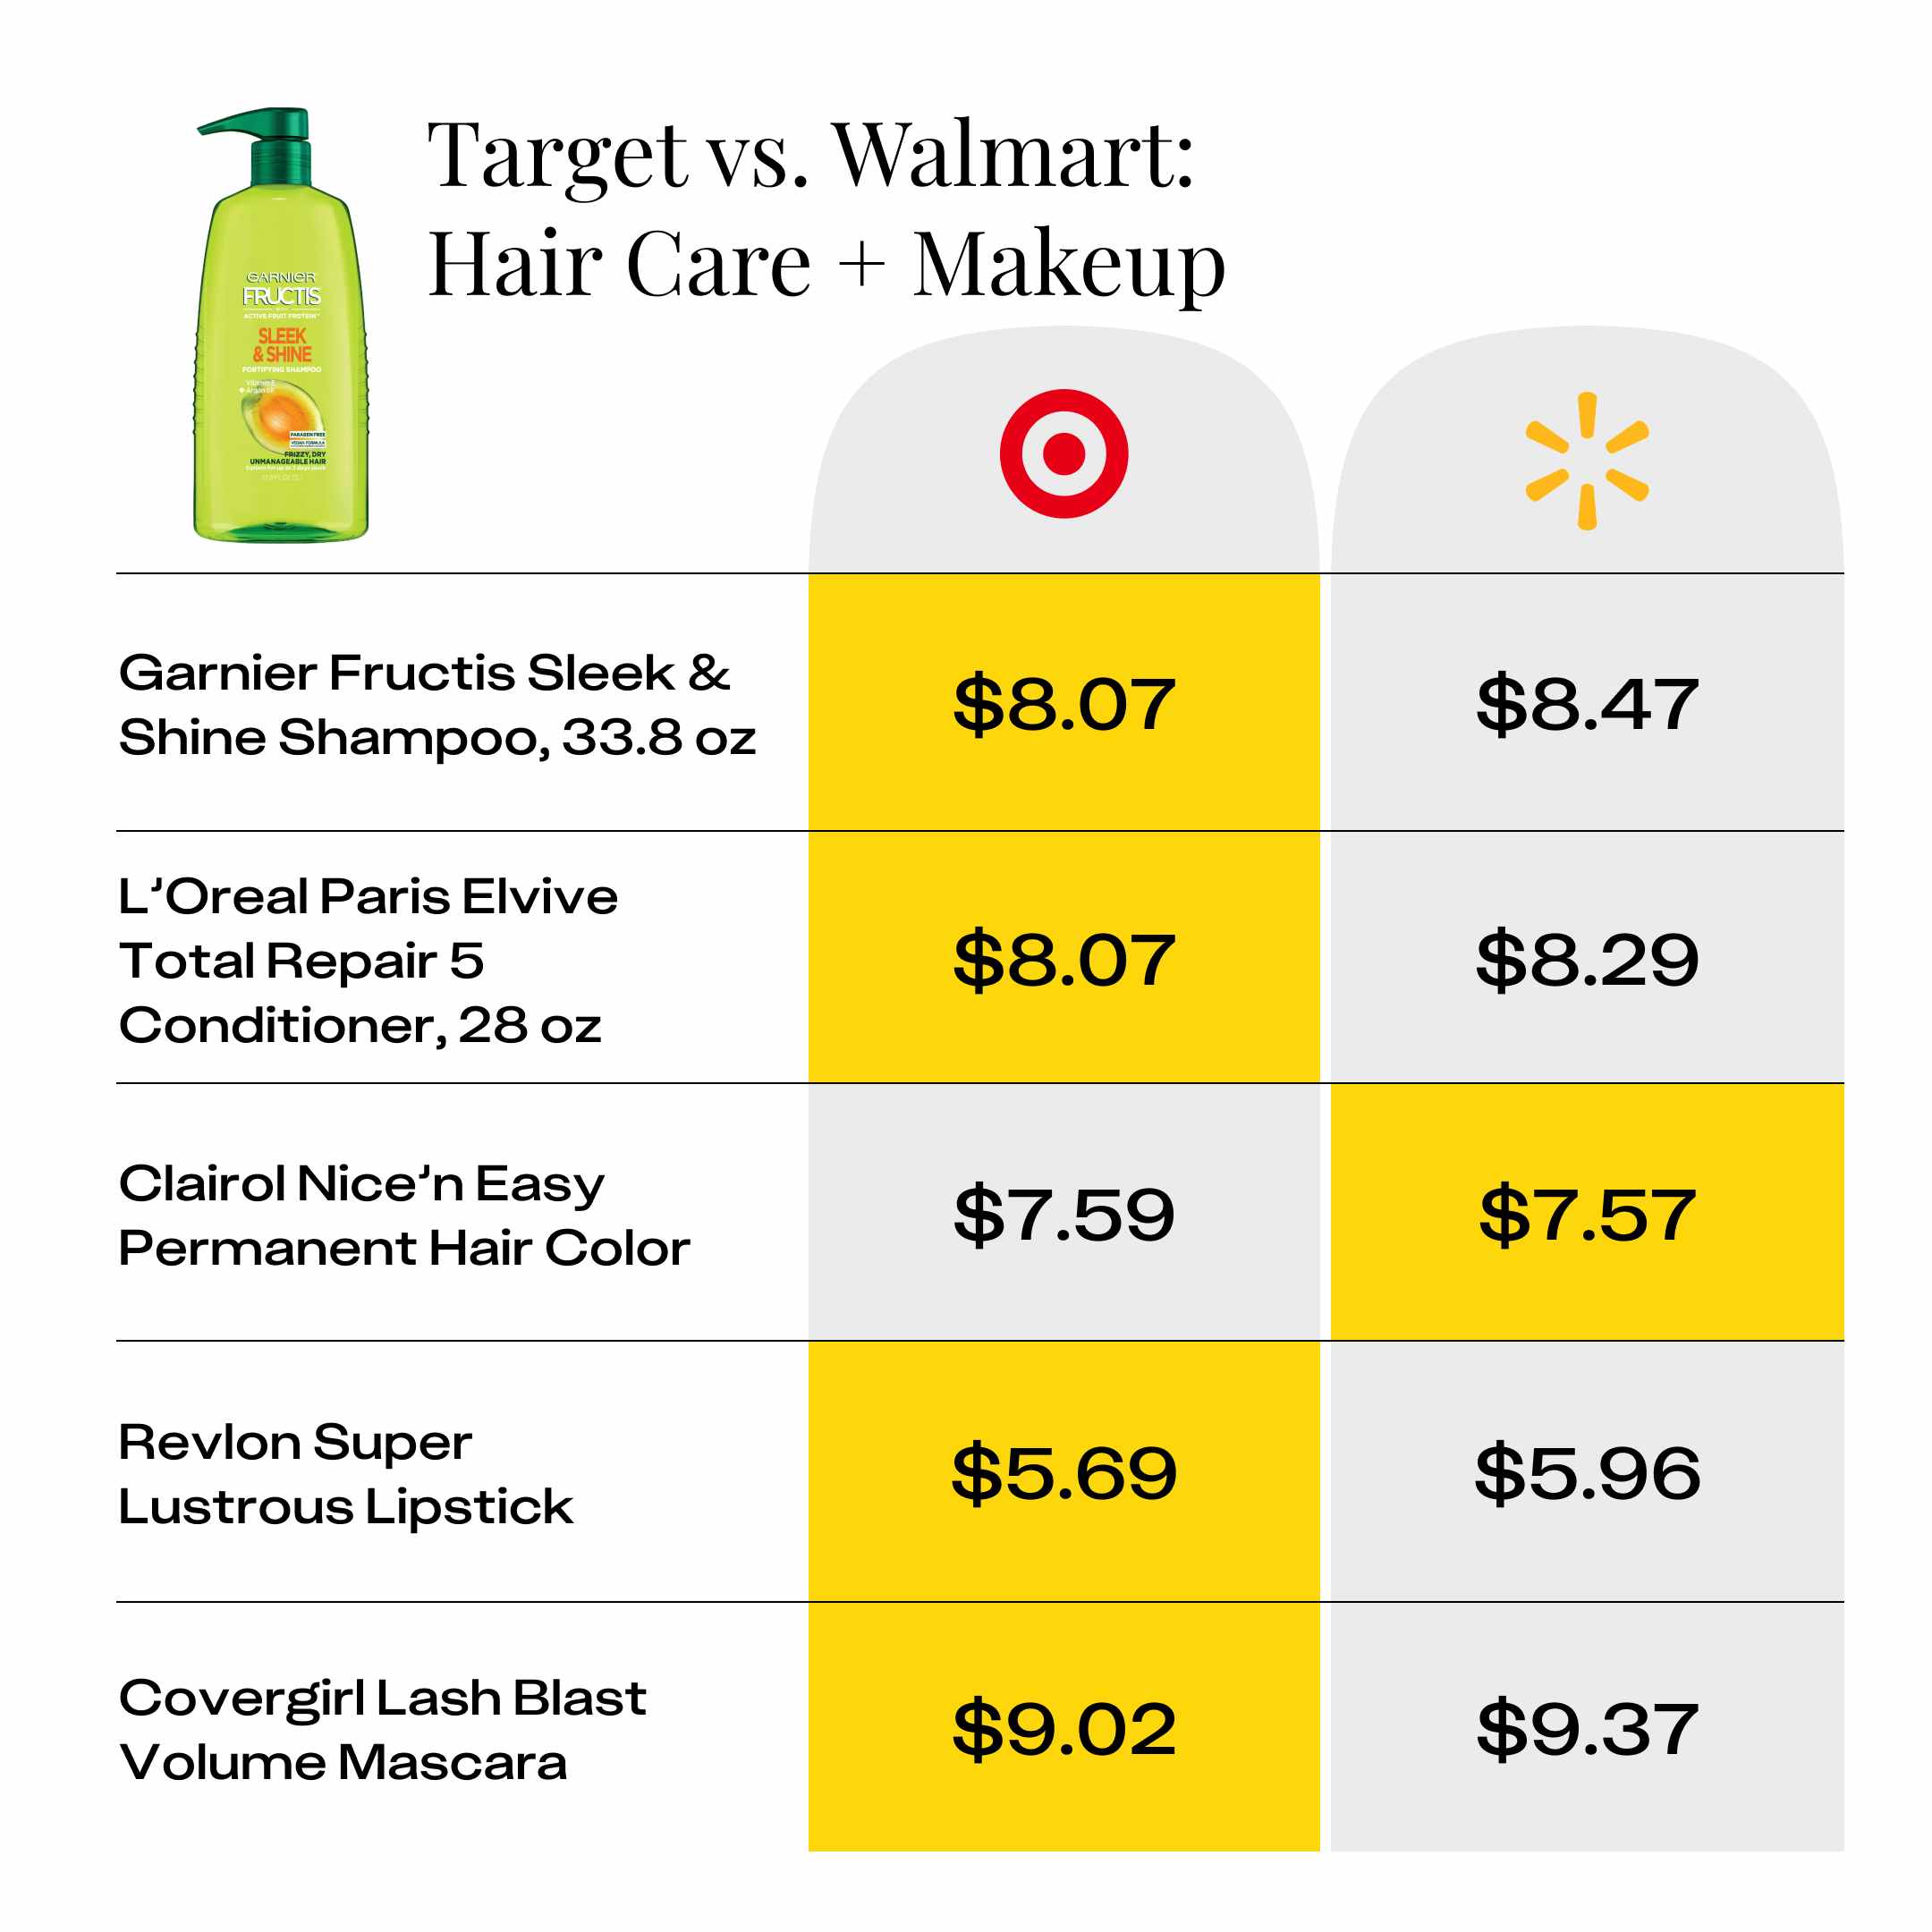 price comparison for hair care and makeup at Target and Walmart